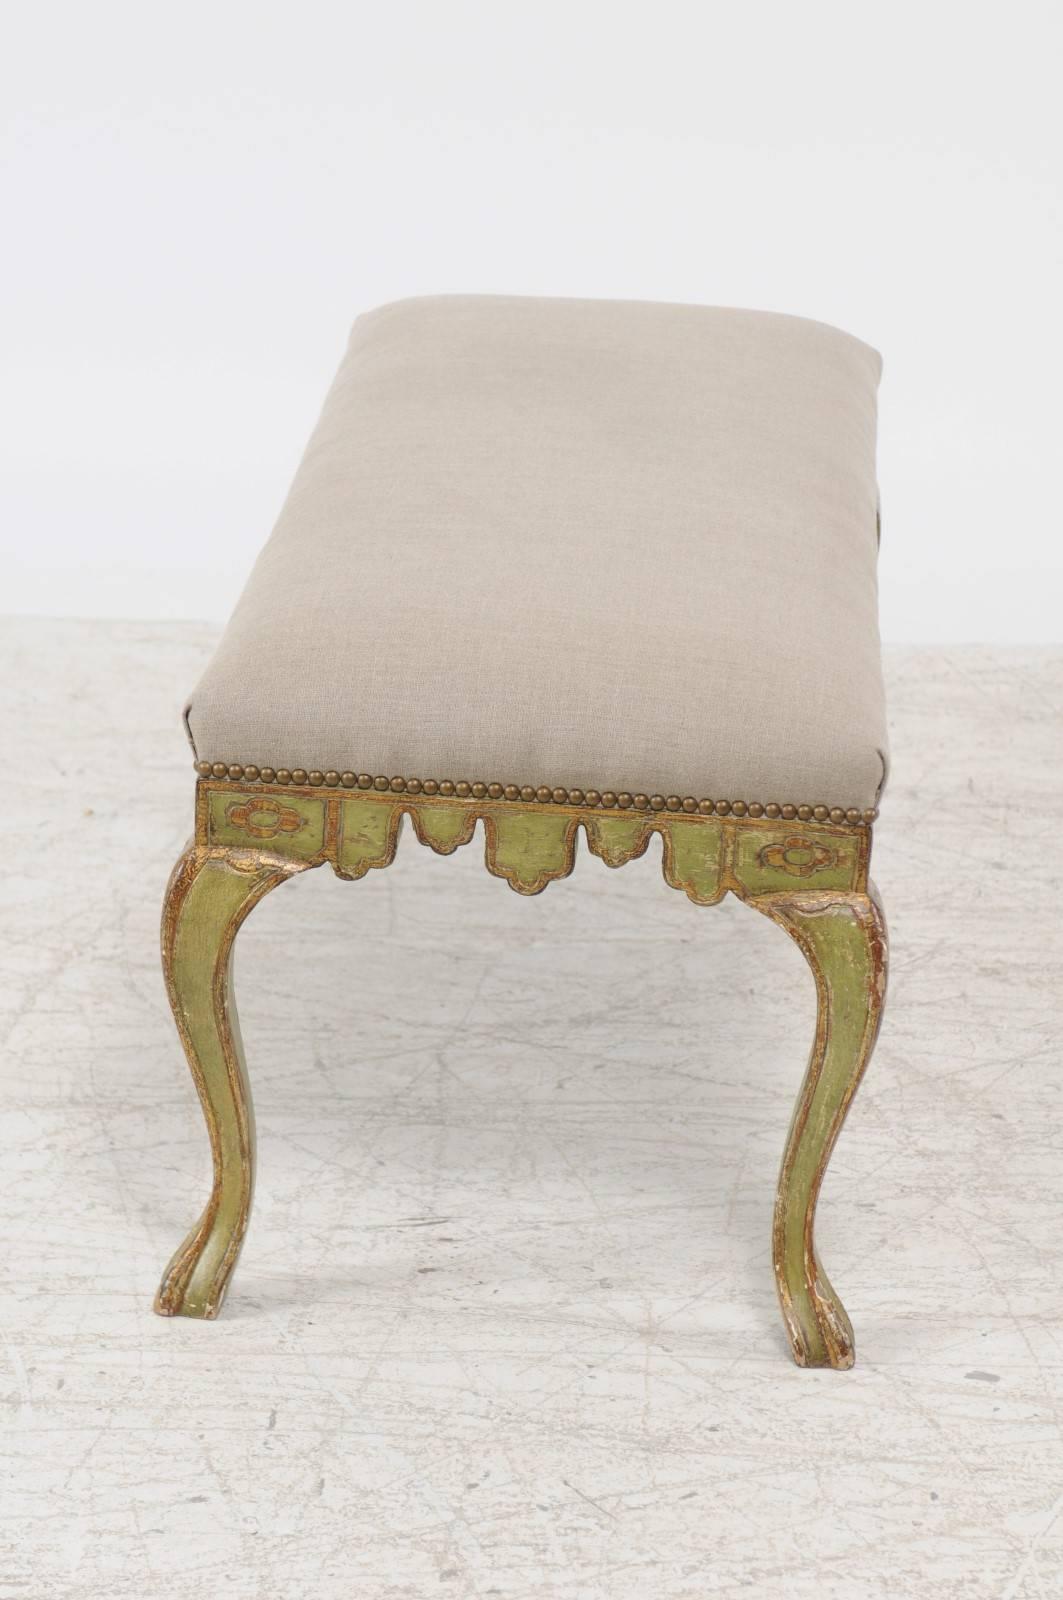 20th Century 1930s Italian Rococo Style Painted and Upholstered Bench with Carved Apron